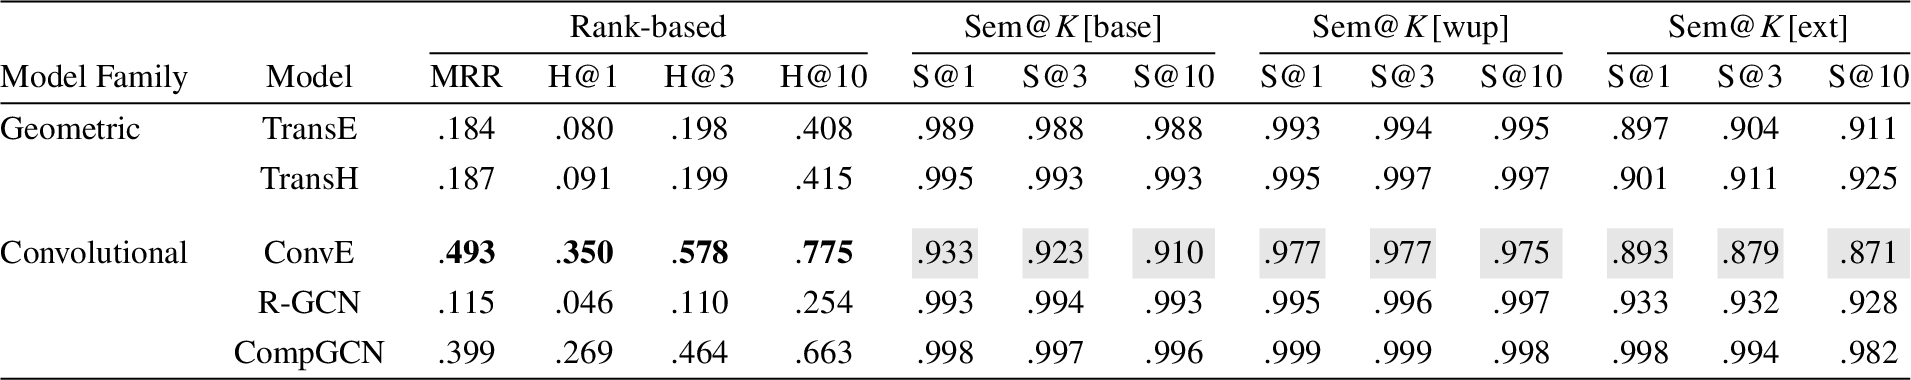 Results on YAGO3-37K. Bold fonts and gray cells denote the best achieved results and the worst achieved results among the models reported in the table, respectively. Full results are available in Appendix B, Table 8